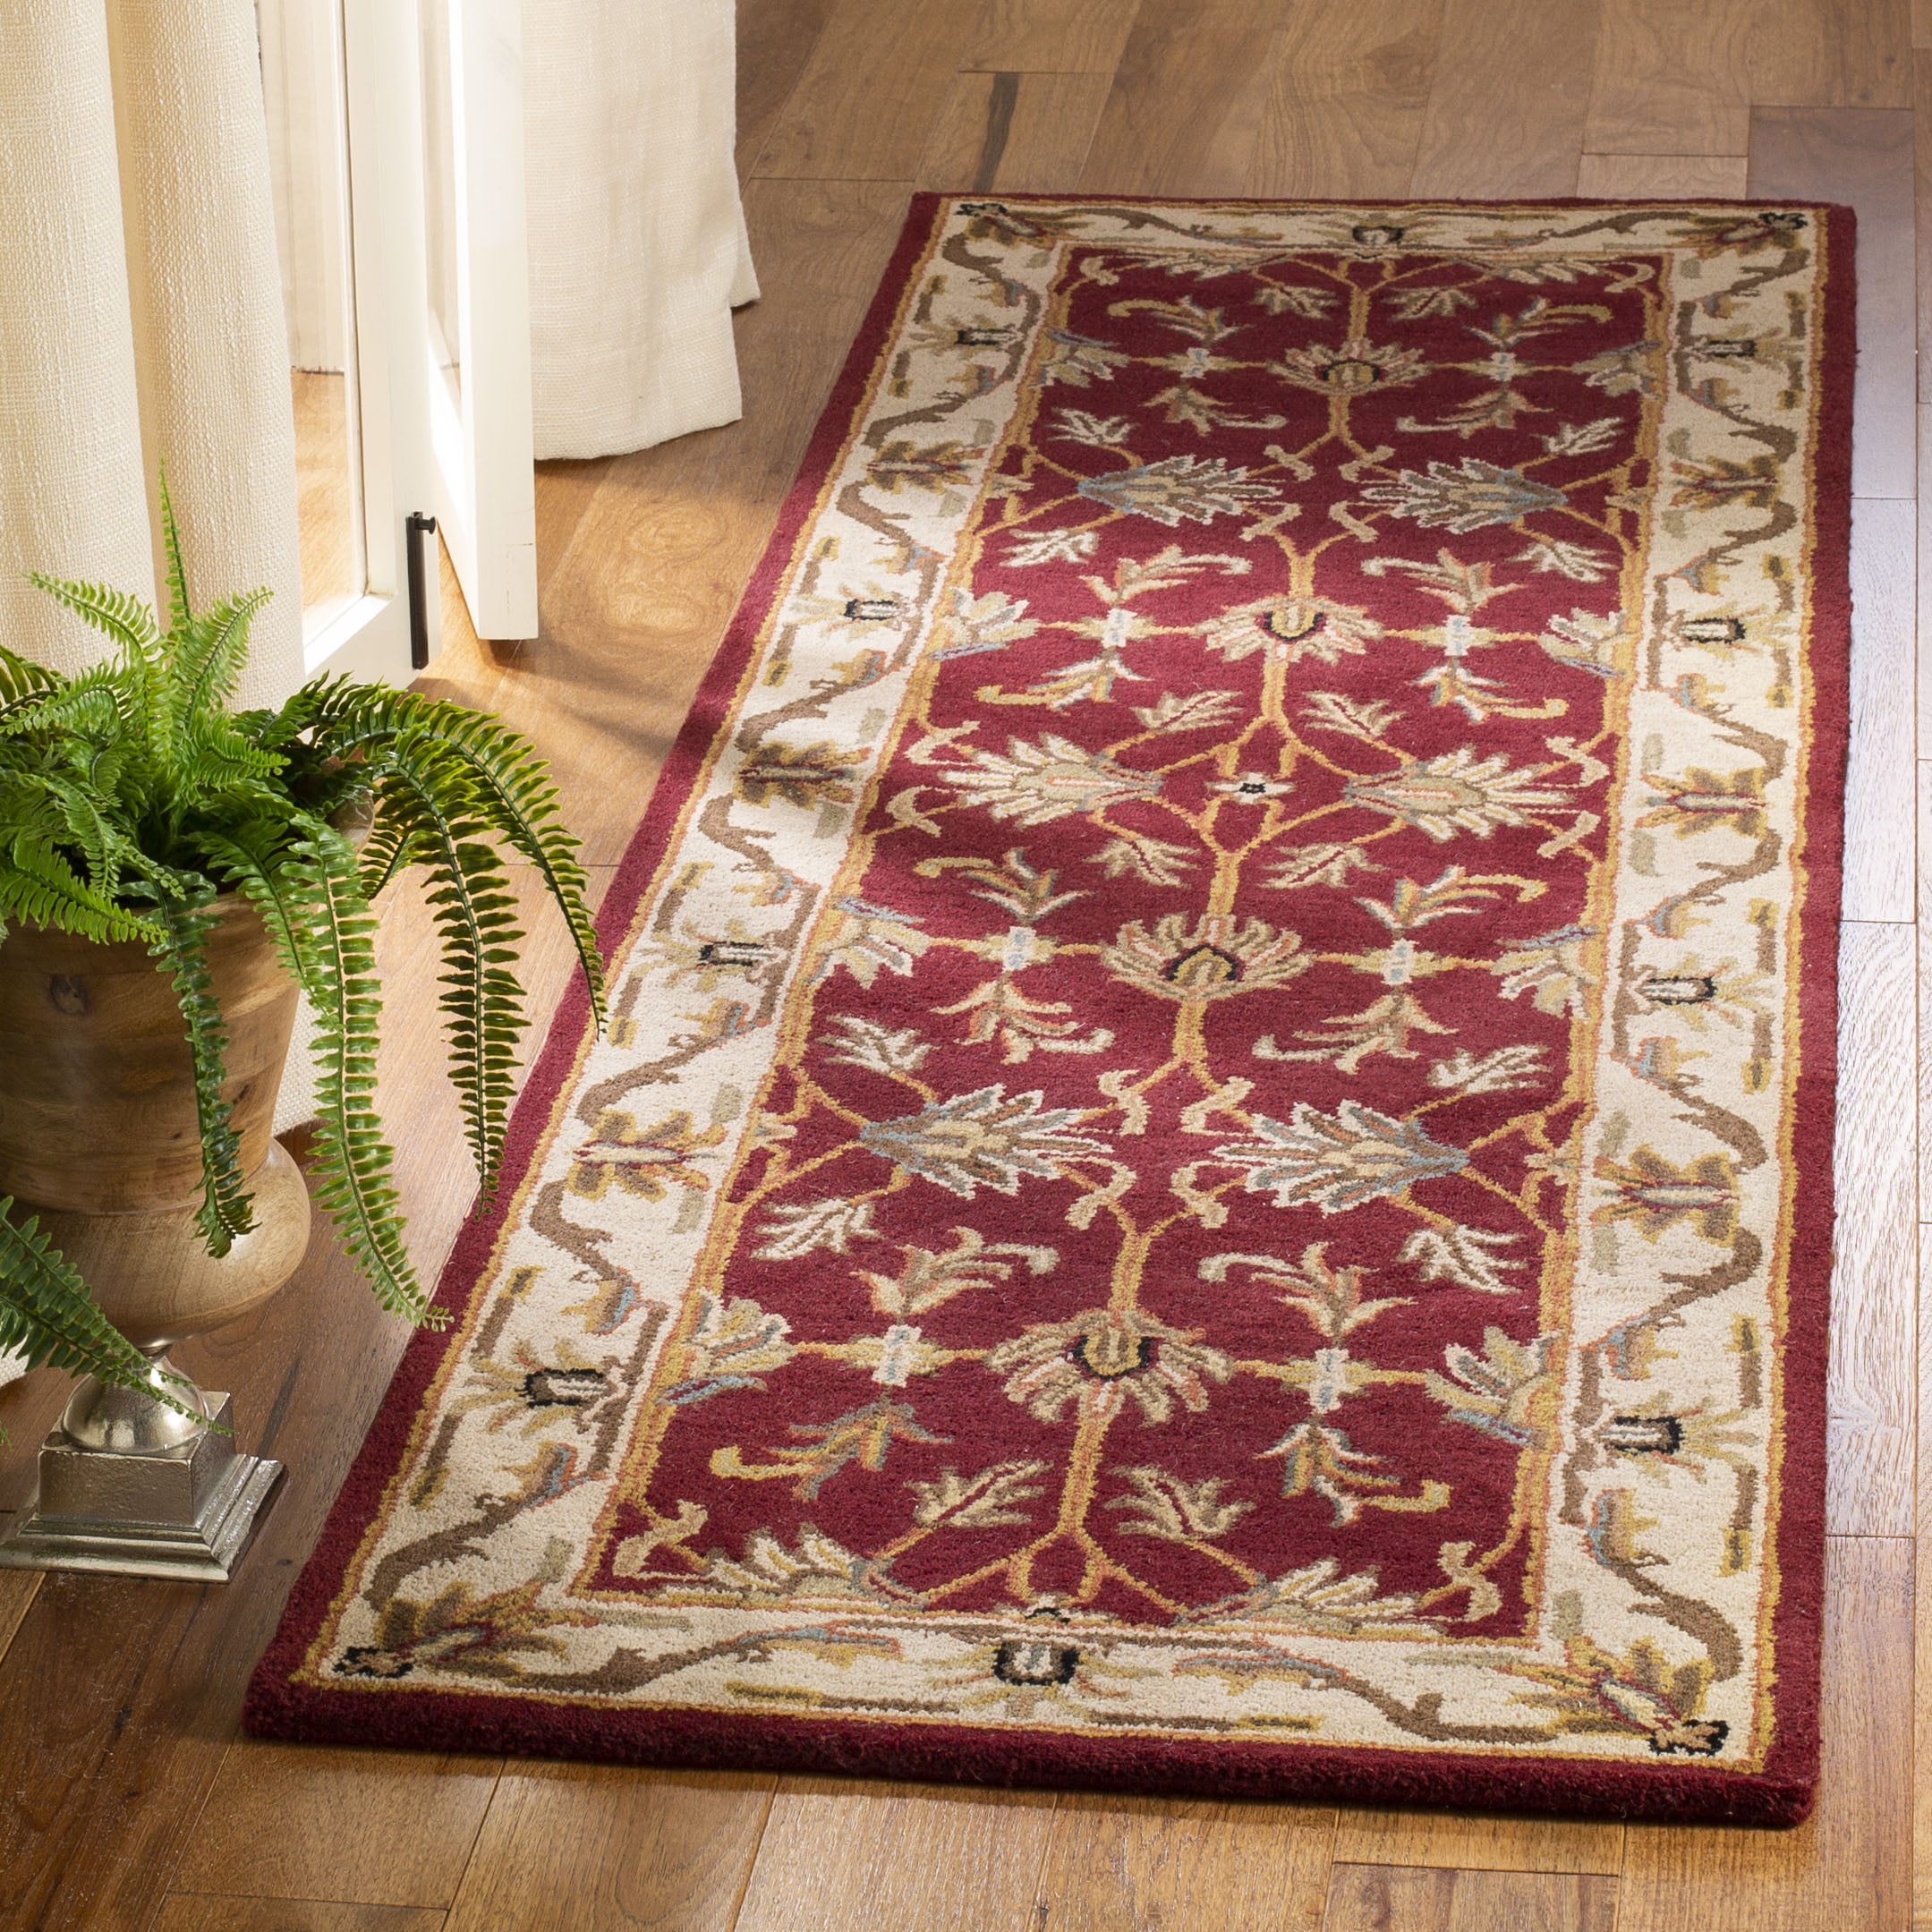 9' x 12' Ivory Safavieh Heritage Collection HG628D Handmade Traditional Oriental Premium Wool Area Rug Red